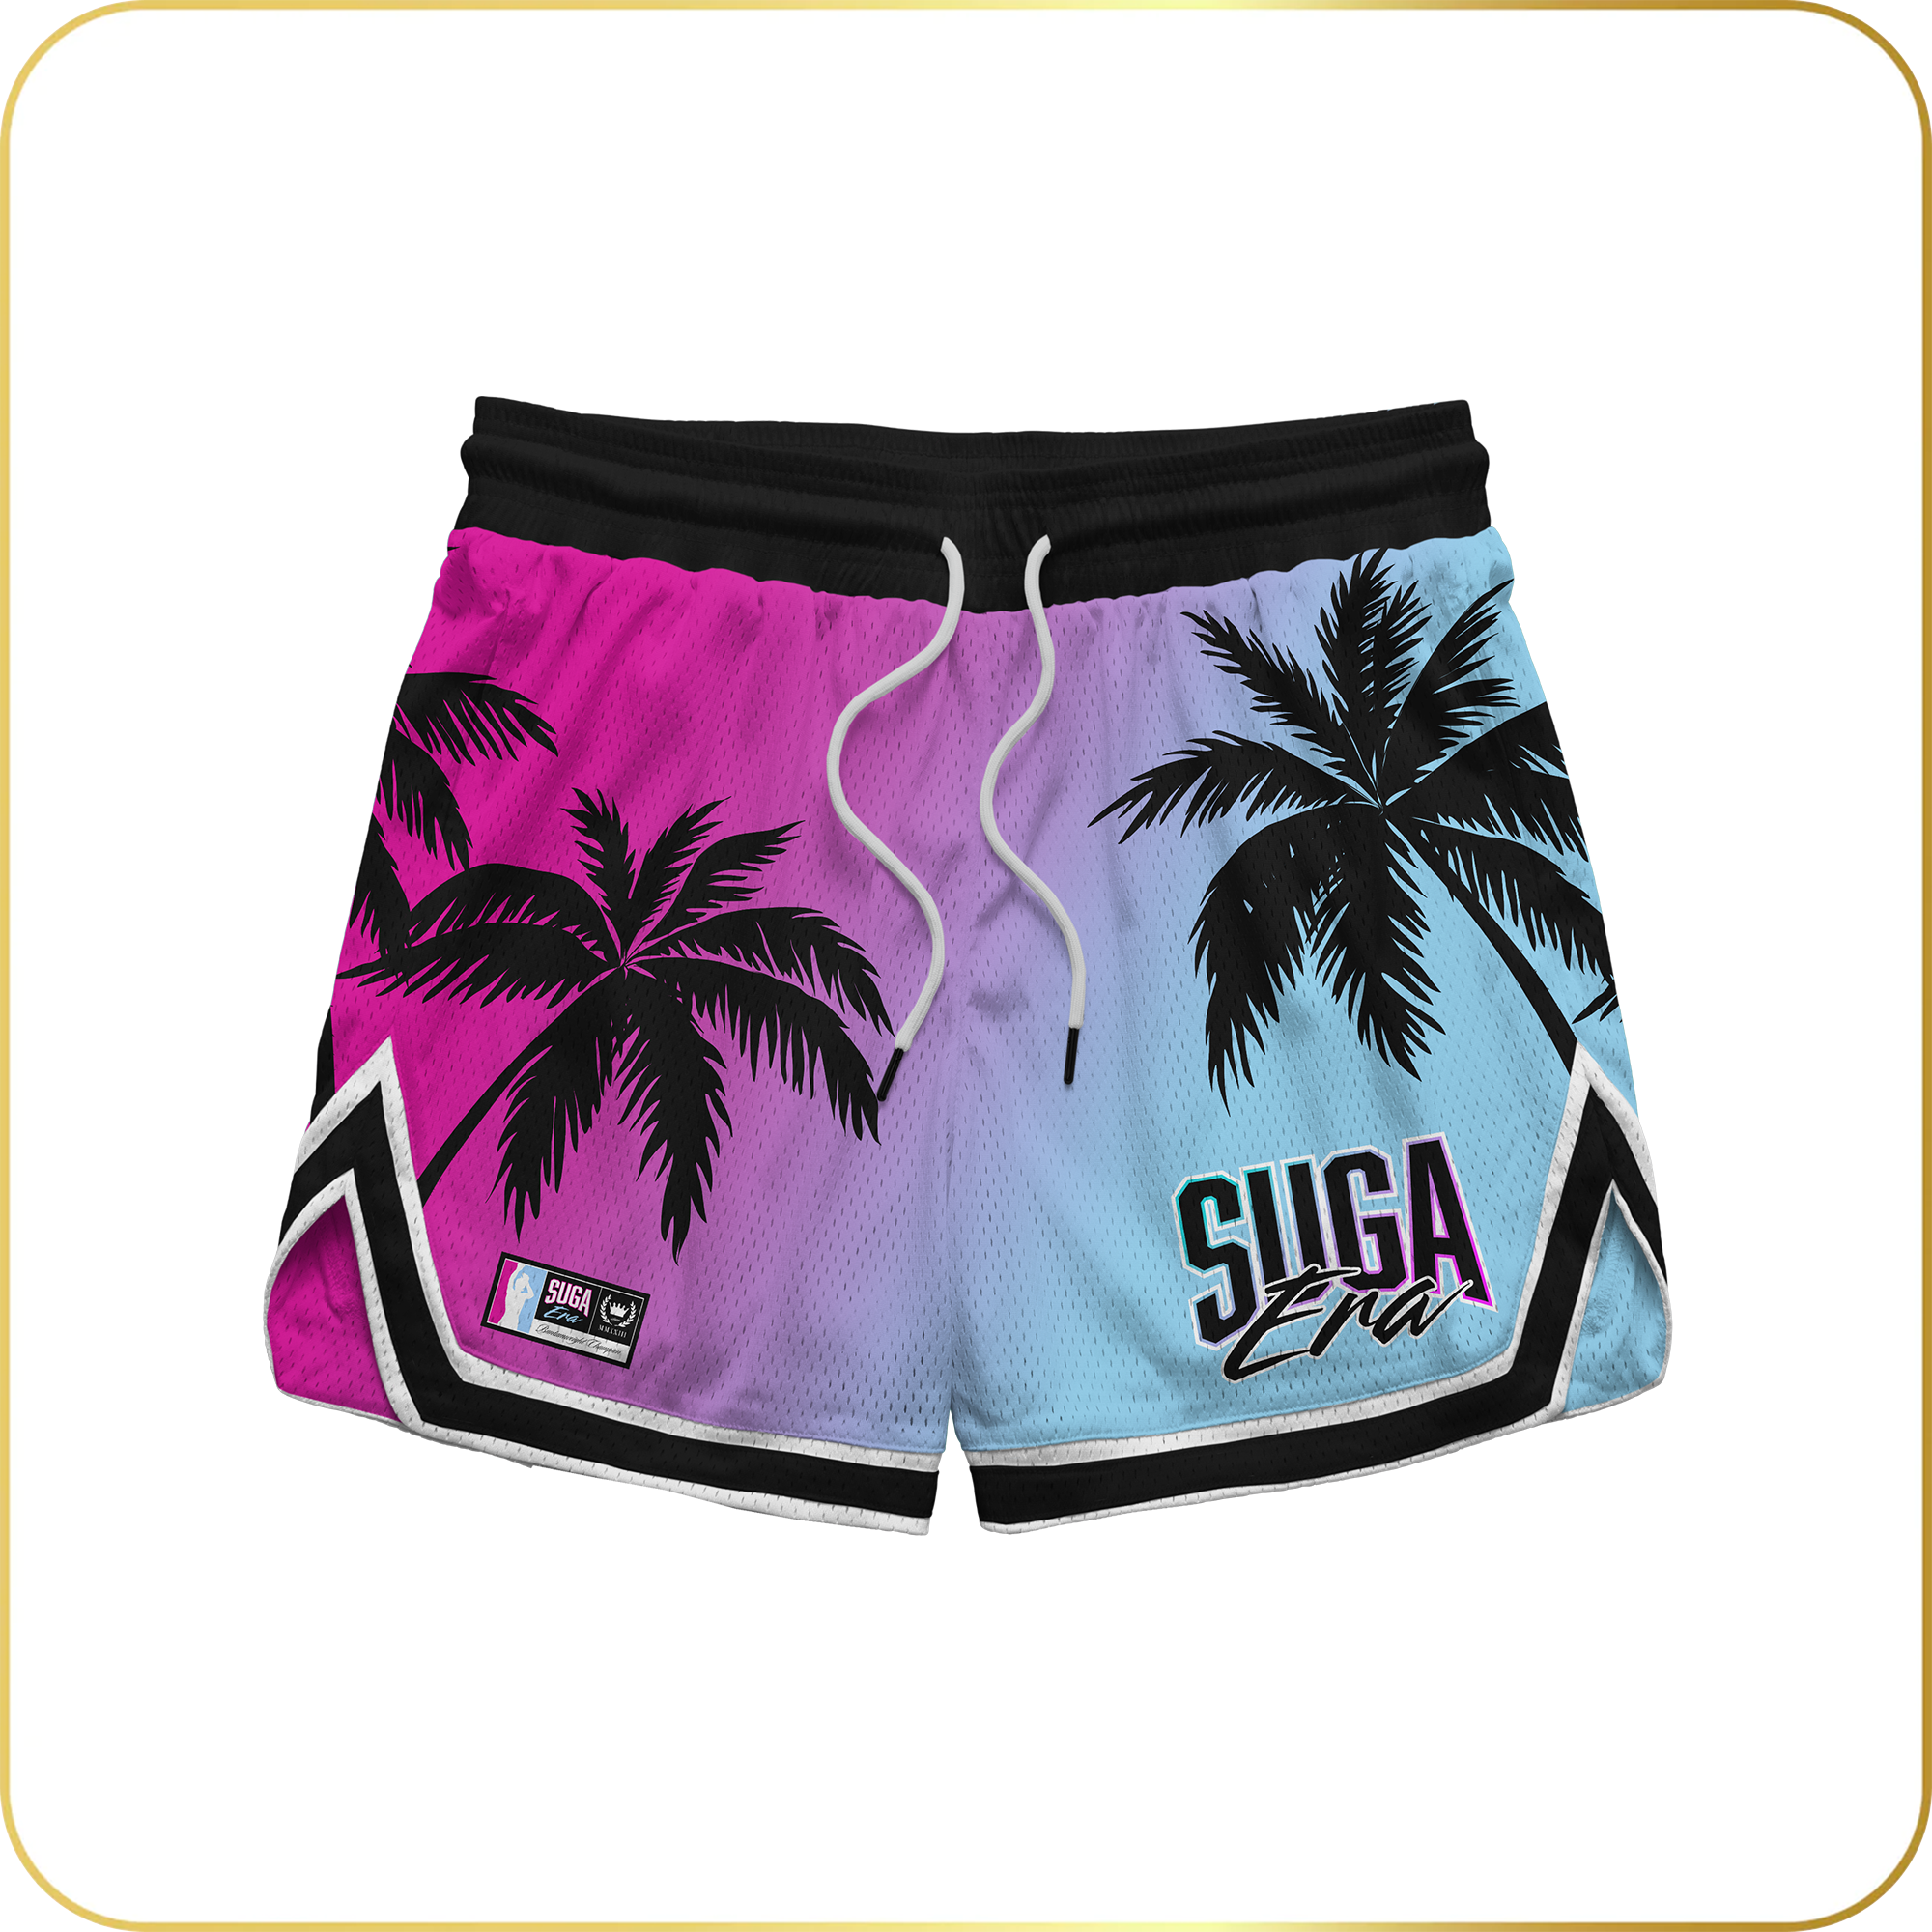 Limited Edition Miami Shorts